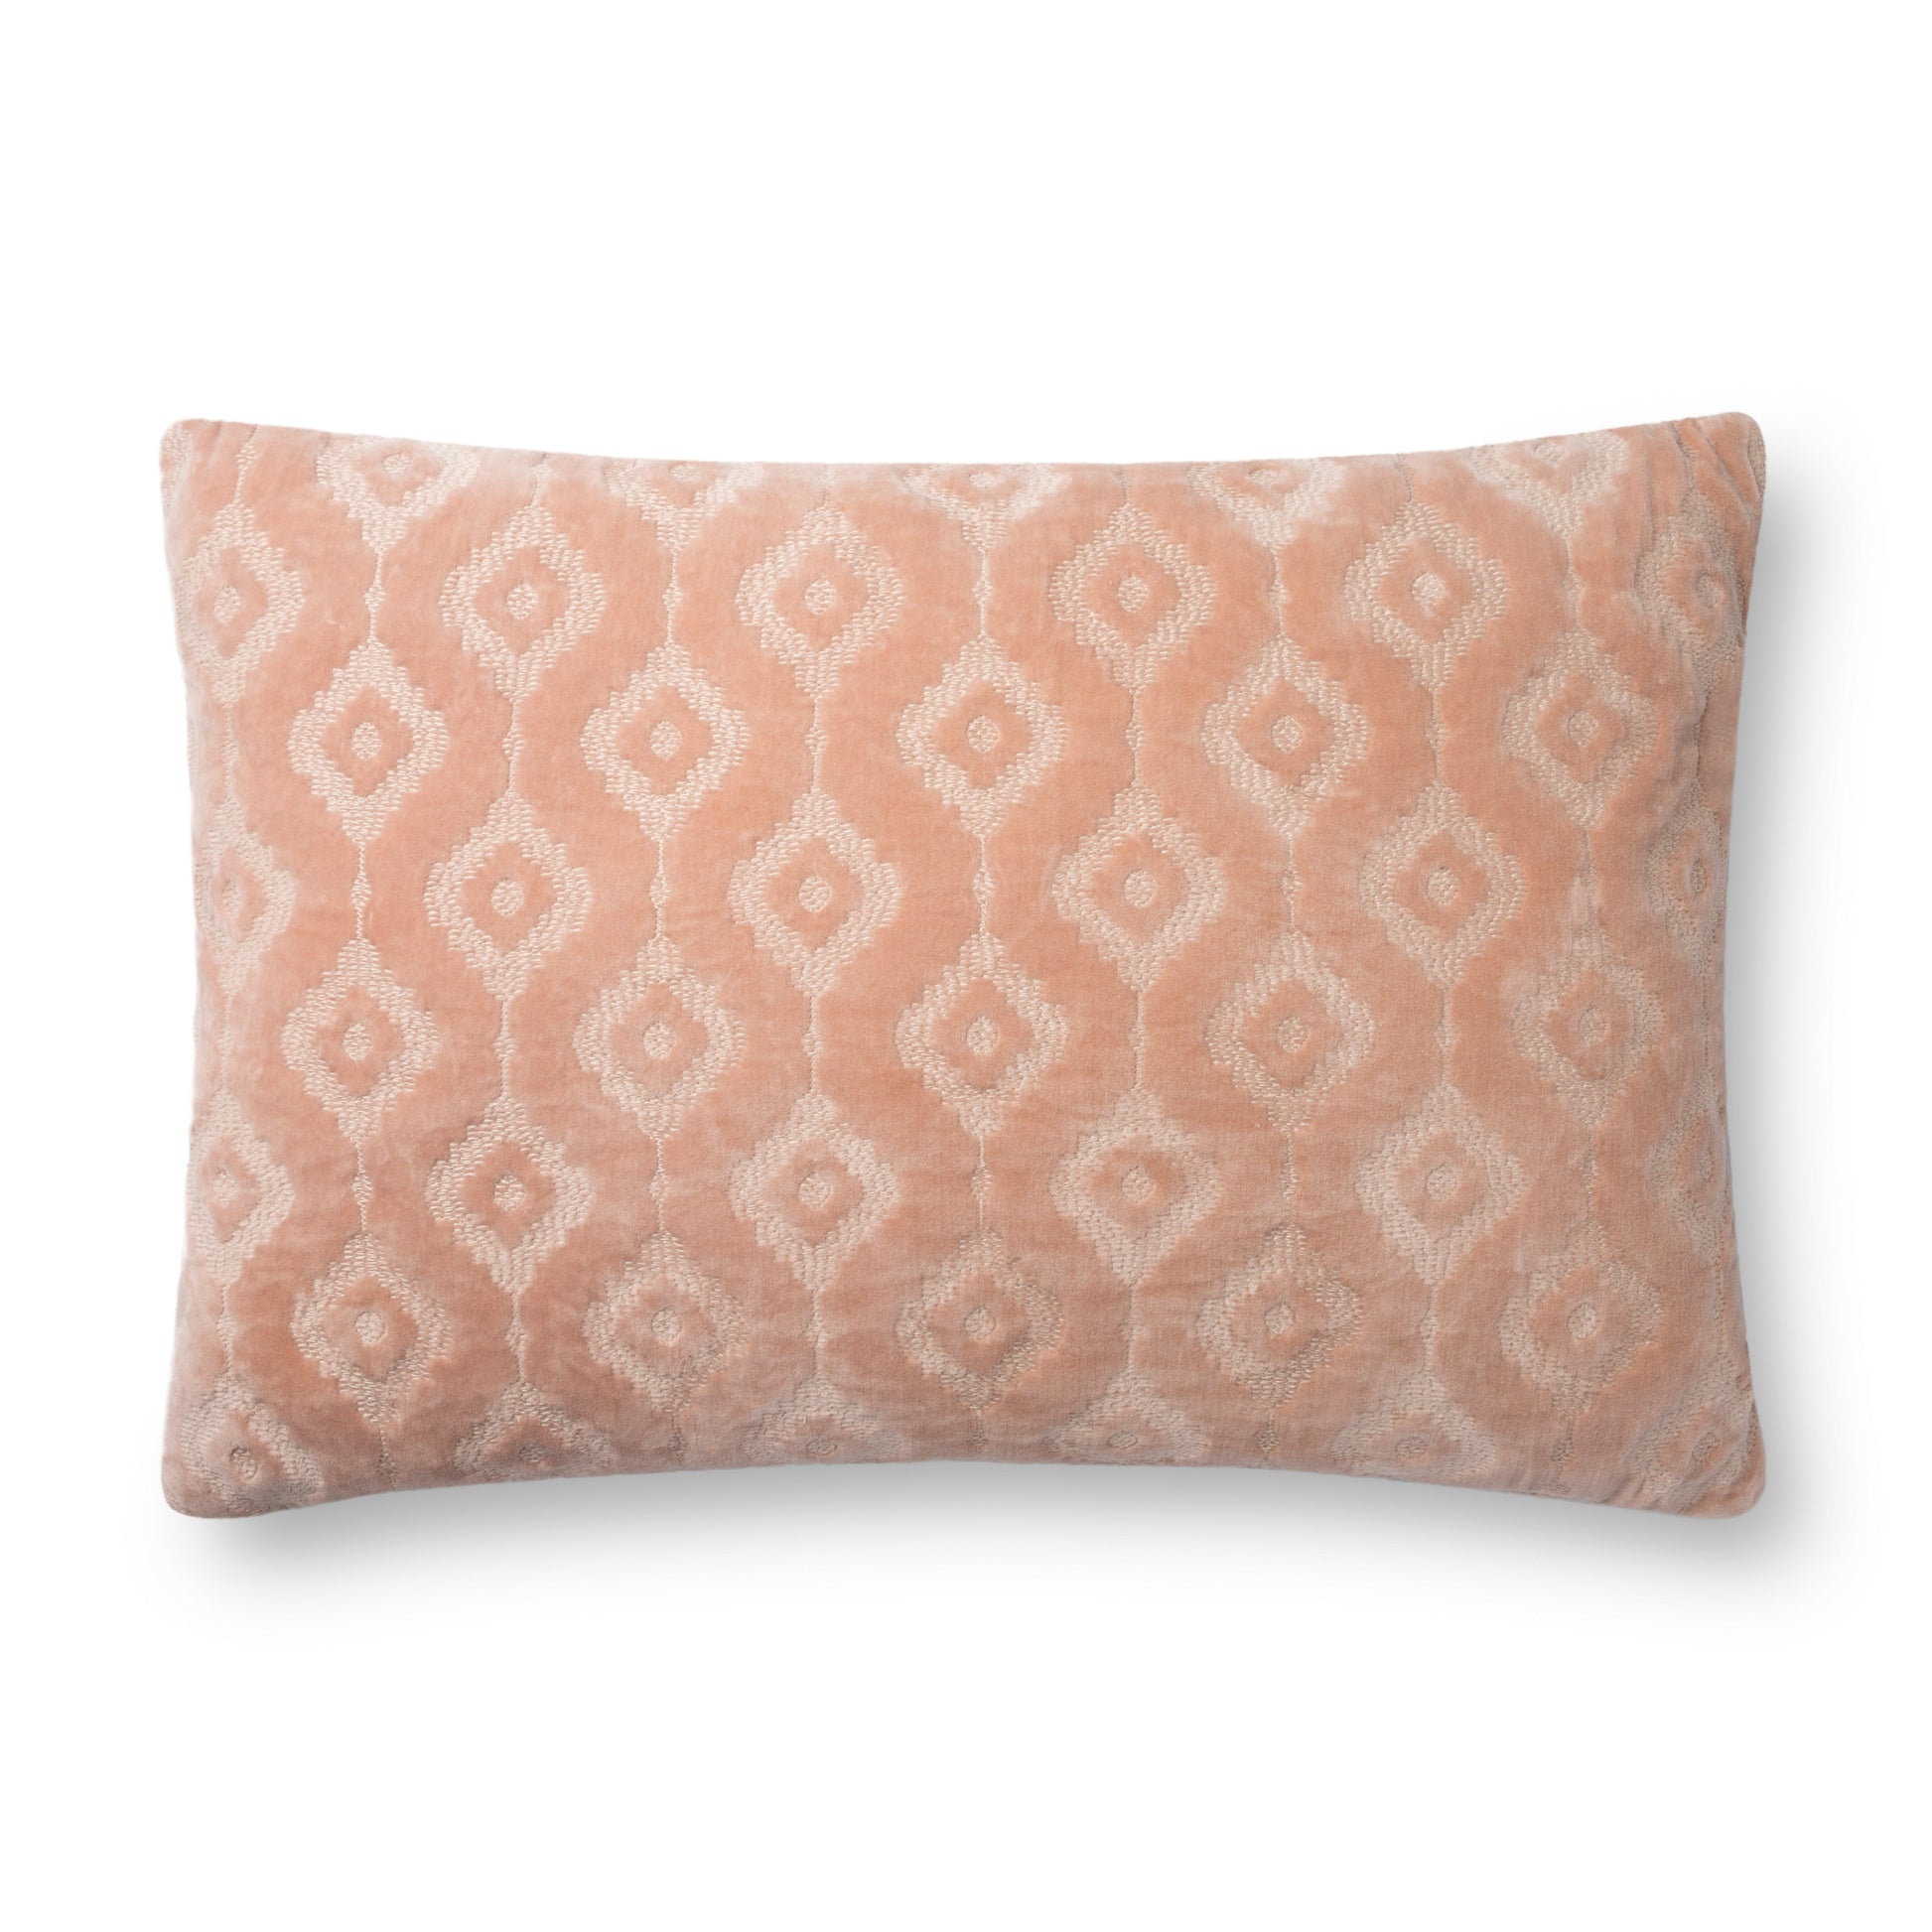 Photo of a pillow;  P0866 Blush 16" x 26" Cover w/Poly Pillow